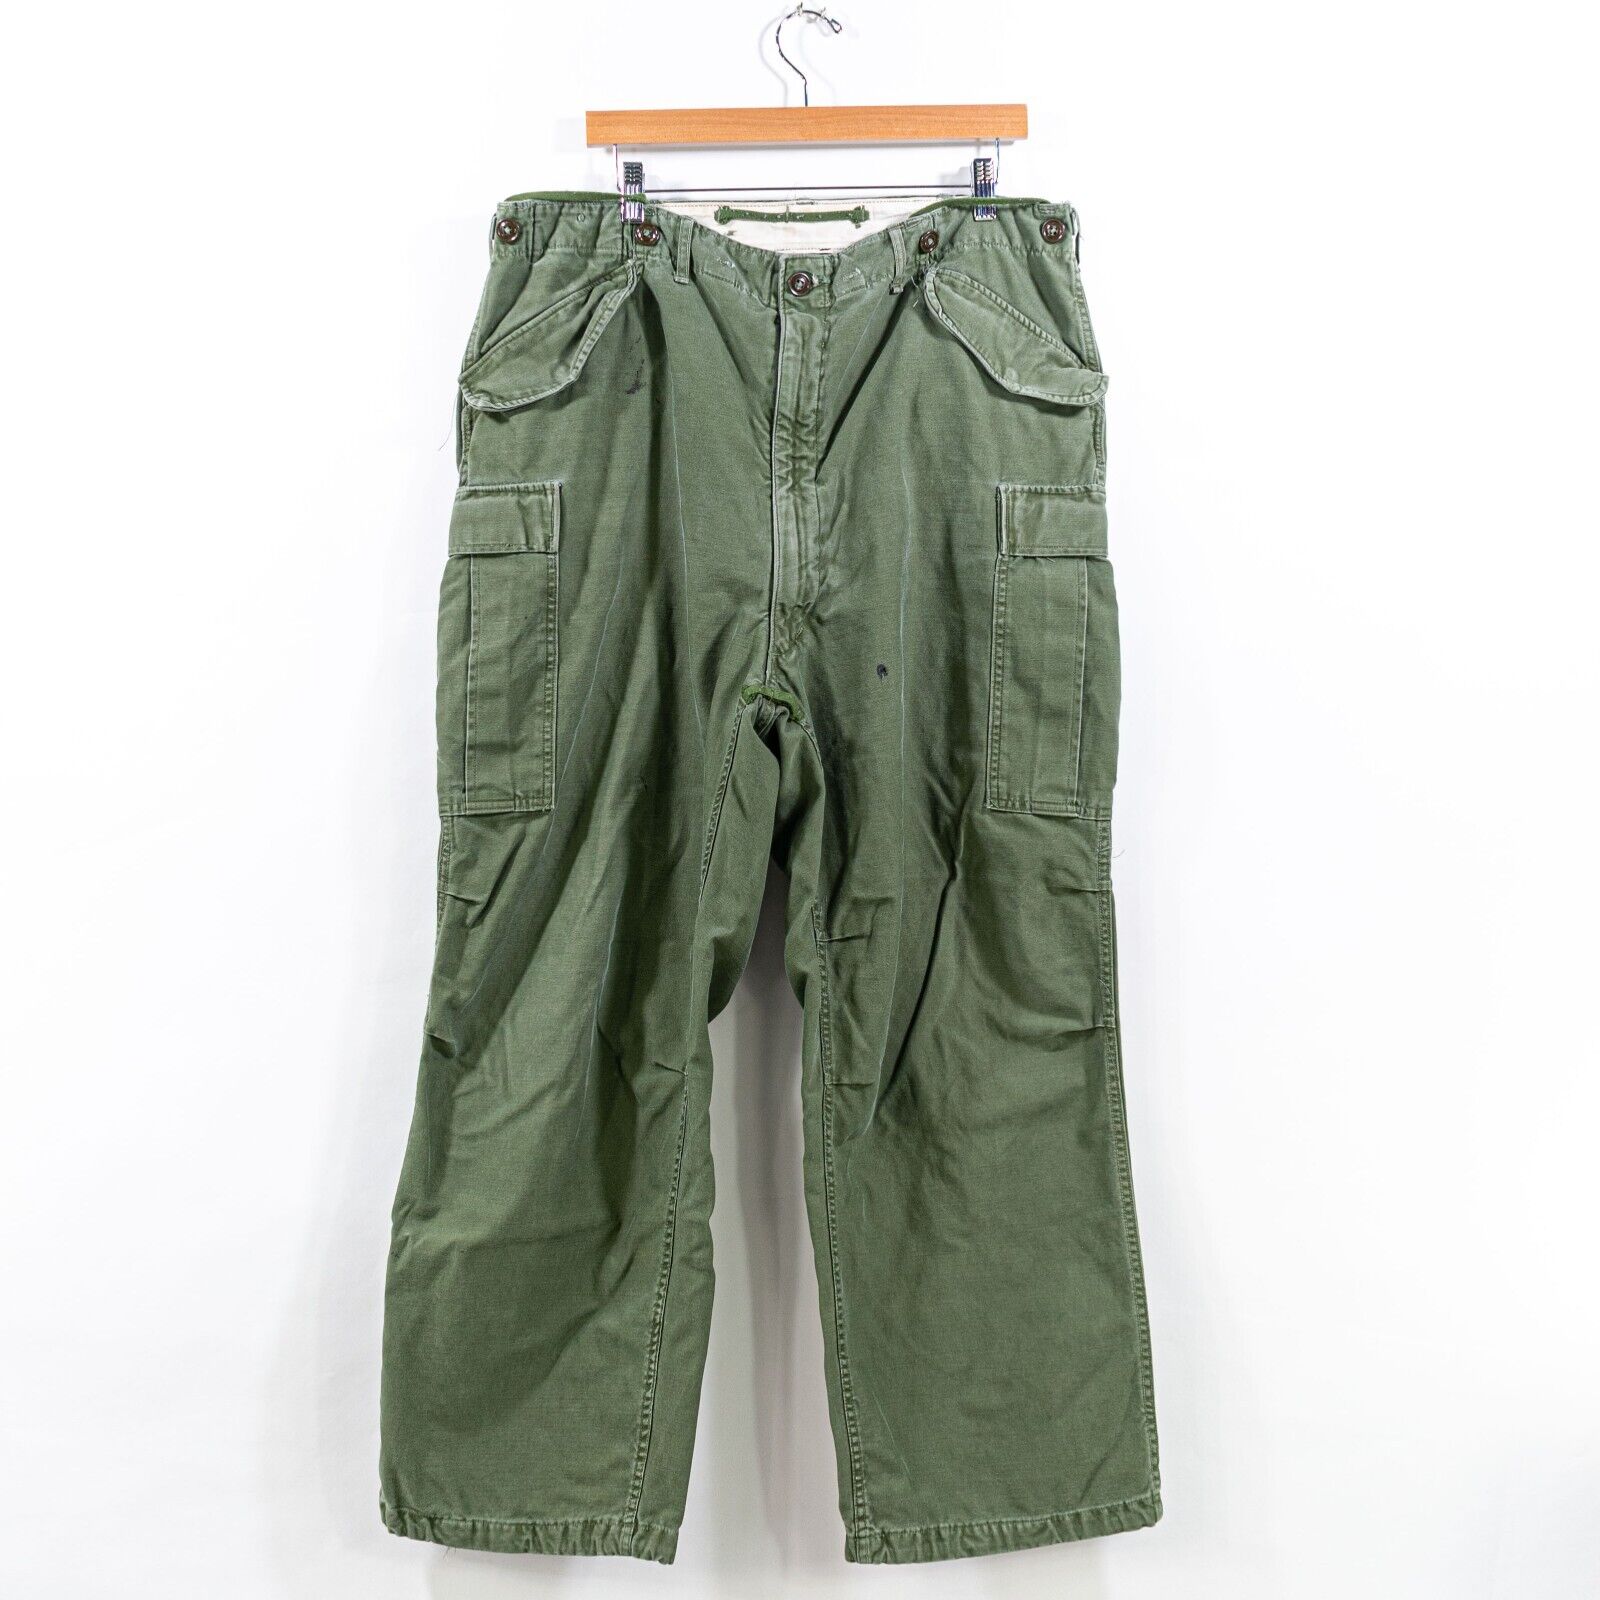 M-1951 US Army Field Trousers Cargo Pants Large Regular 1950s